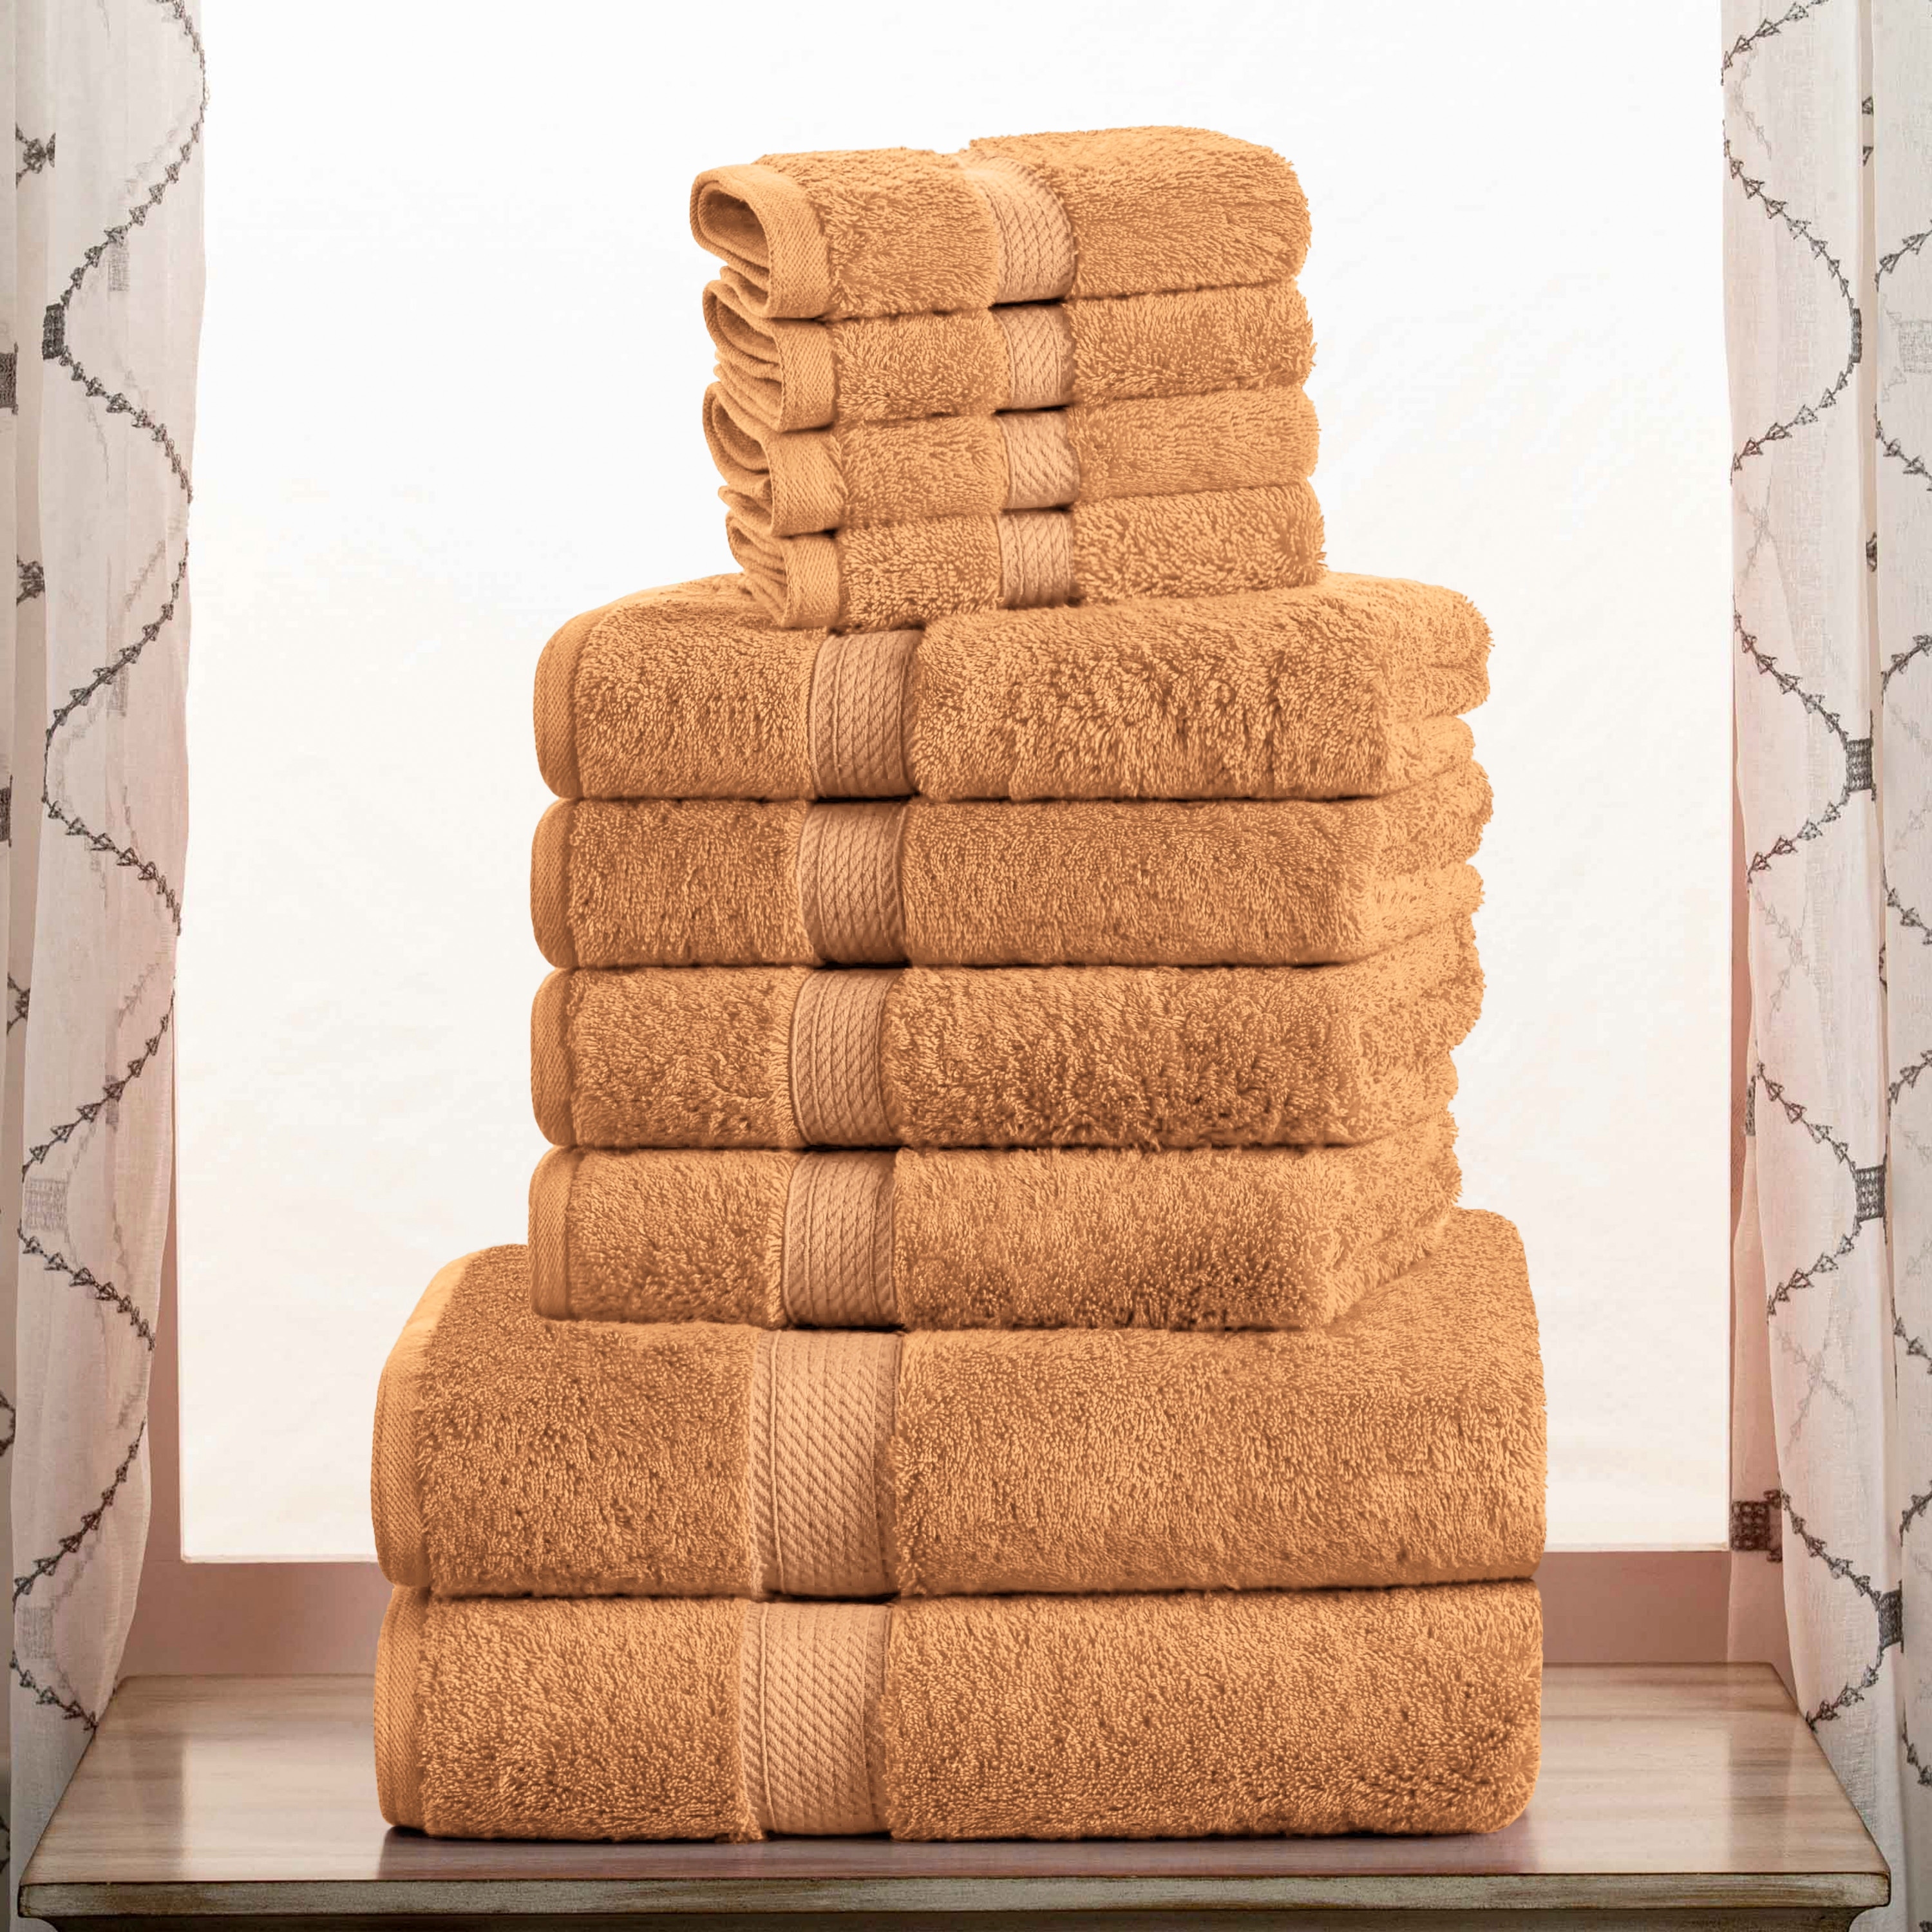 https://ak1.ostkcdn.com/images/products/is/images/direct/6ae12f37fa322cbeff1d5fe6029f7b2054b3bf18/Egyptian-Cotton-Heavyweight-Solid-Plush-Towel-Set-by-Superior.jpg